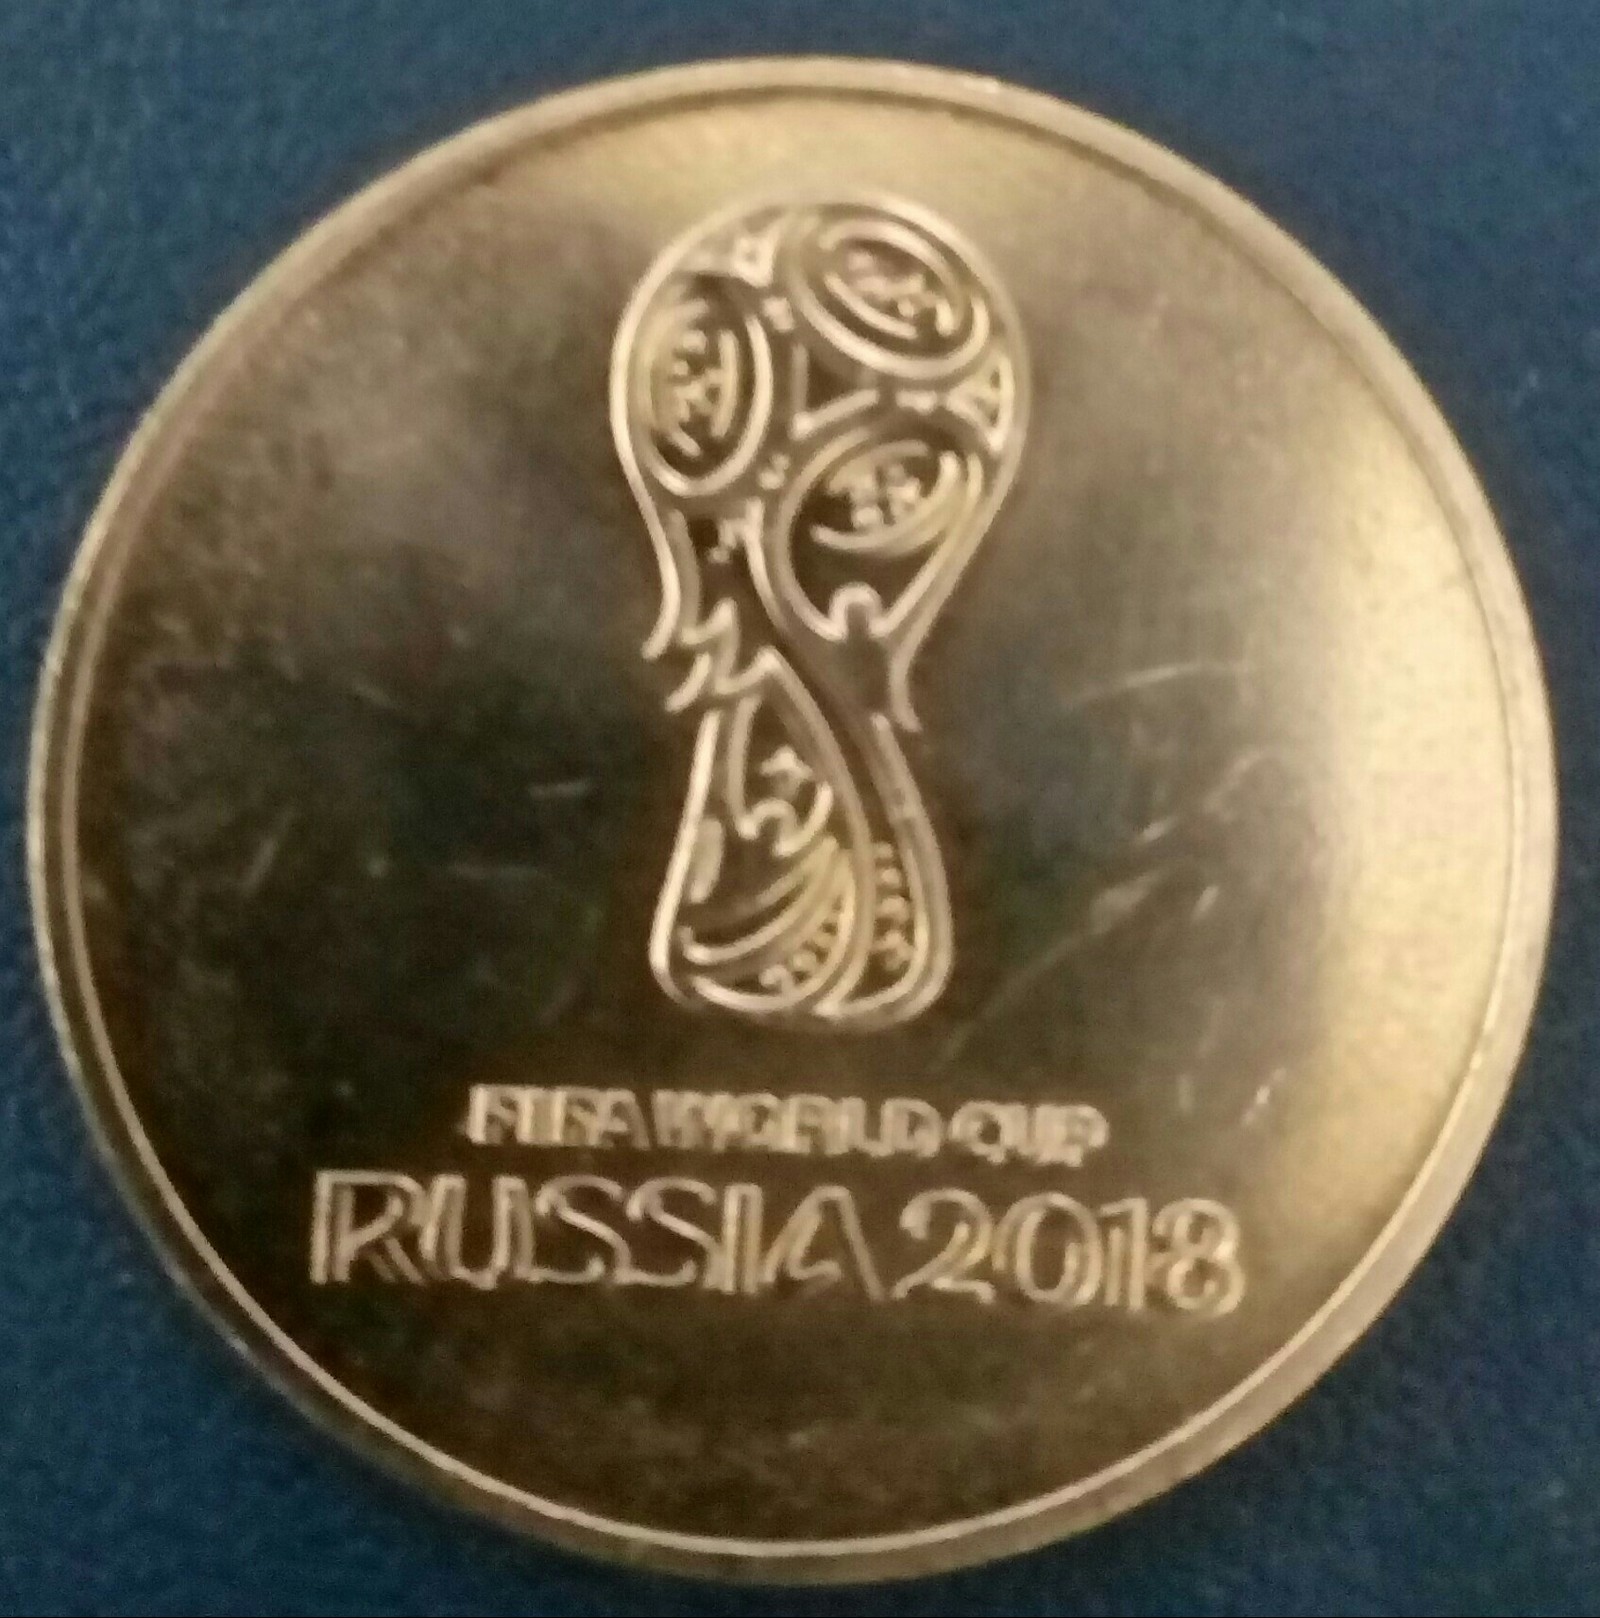 Coin from the future - Central Bank of the Russian Federation, 2018 FIFA World Cup, , Coin, Money